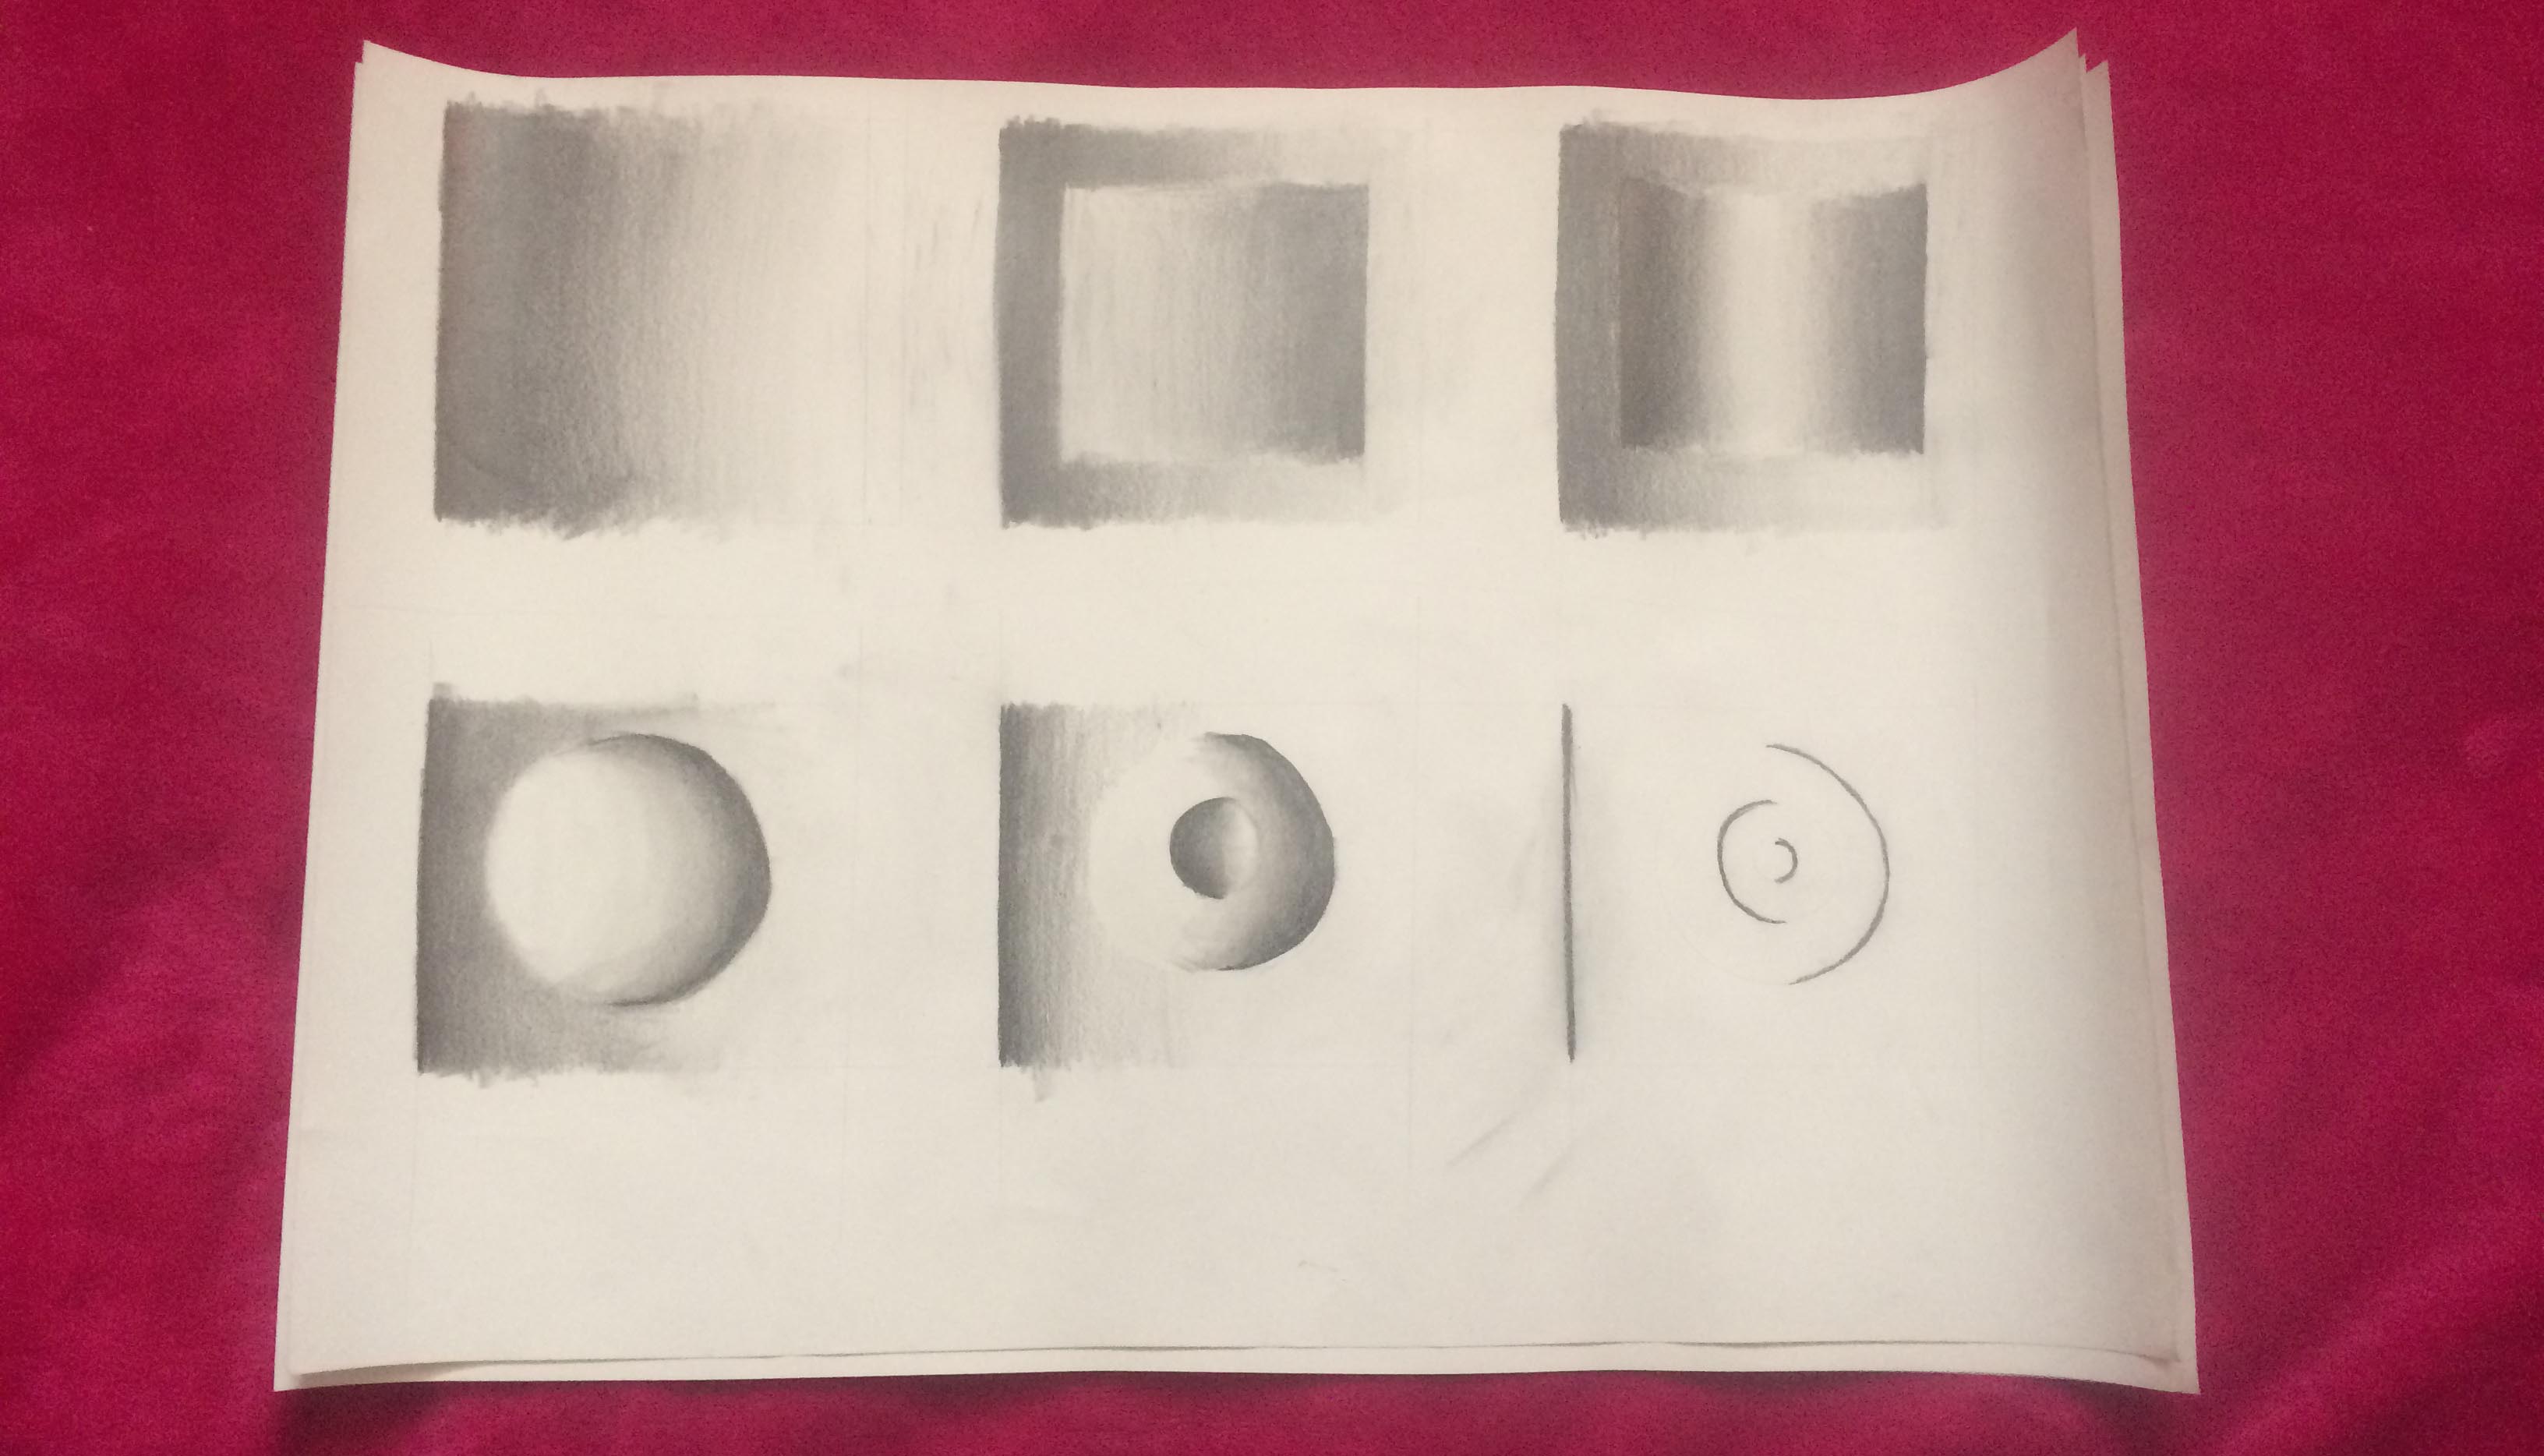 Katie Comley Jones Art Class Depth & Tone Drawing Exercises by Artist Sophie Lawson